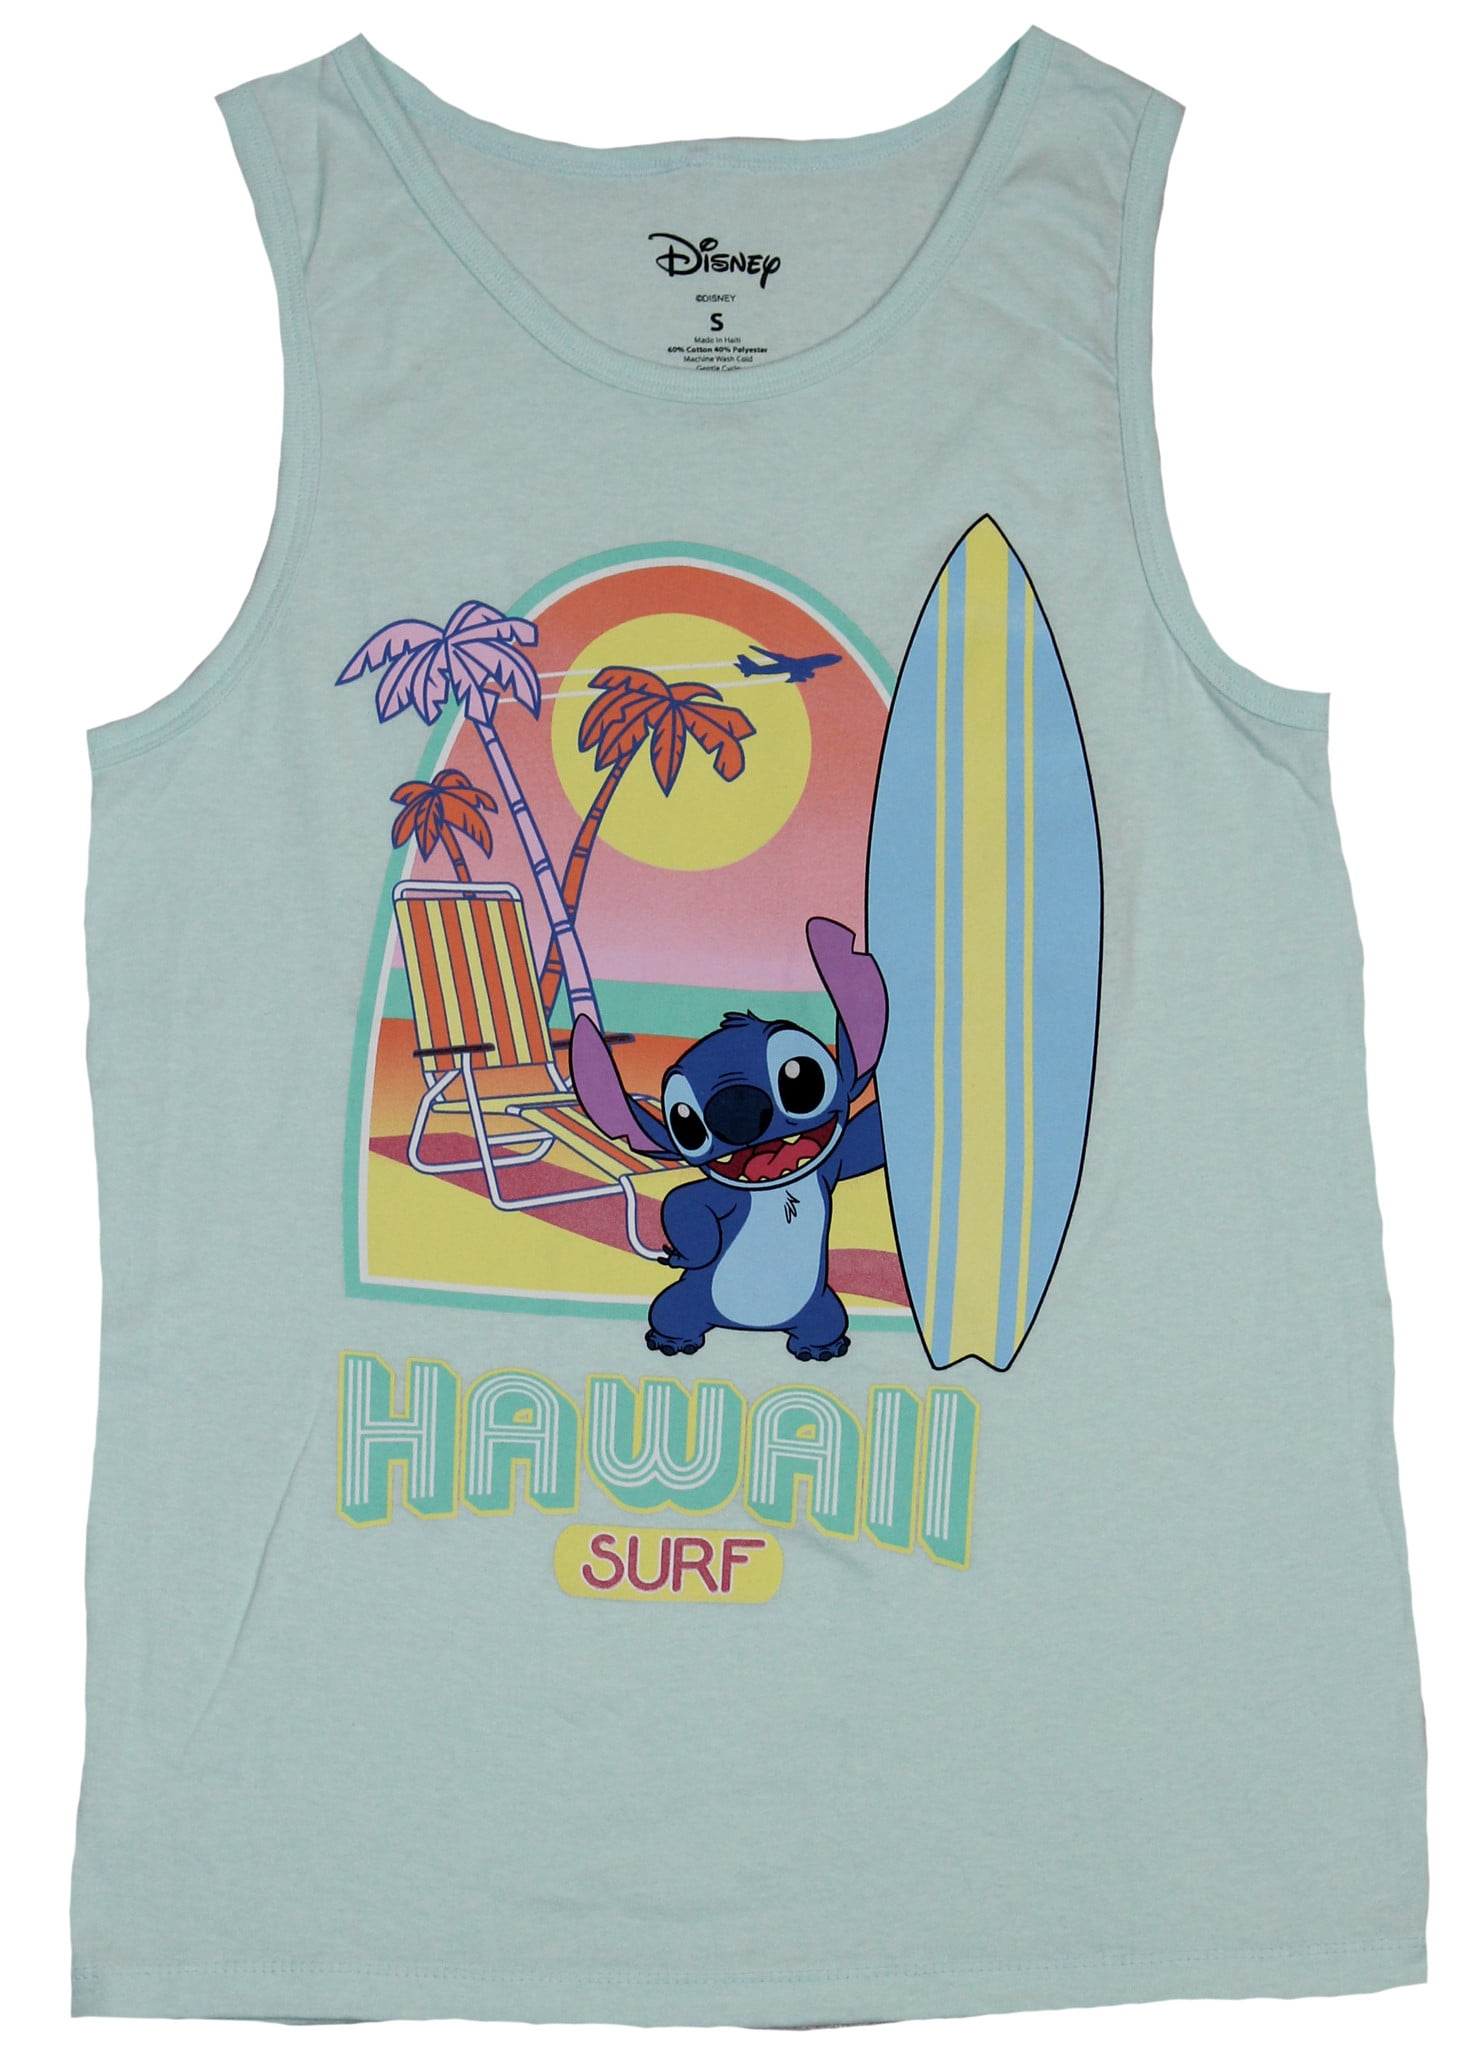 Surf up with Purple Sharks Tank top Surf Up  Tank top Beachy Tank top Ocean surf up Tank top Beach Life Tank top Beach Tank top